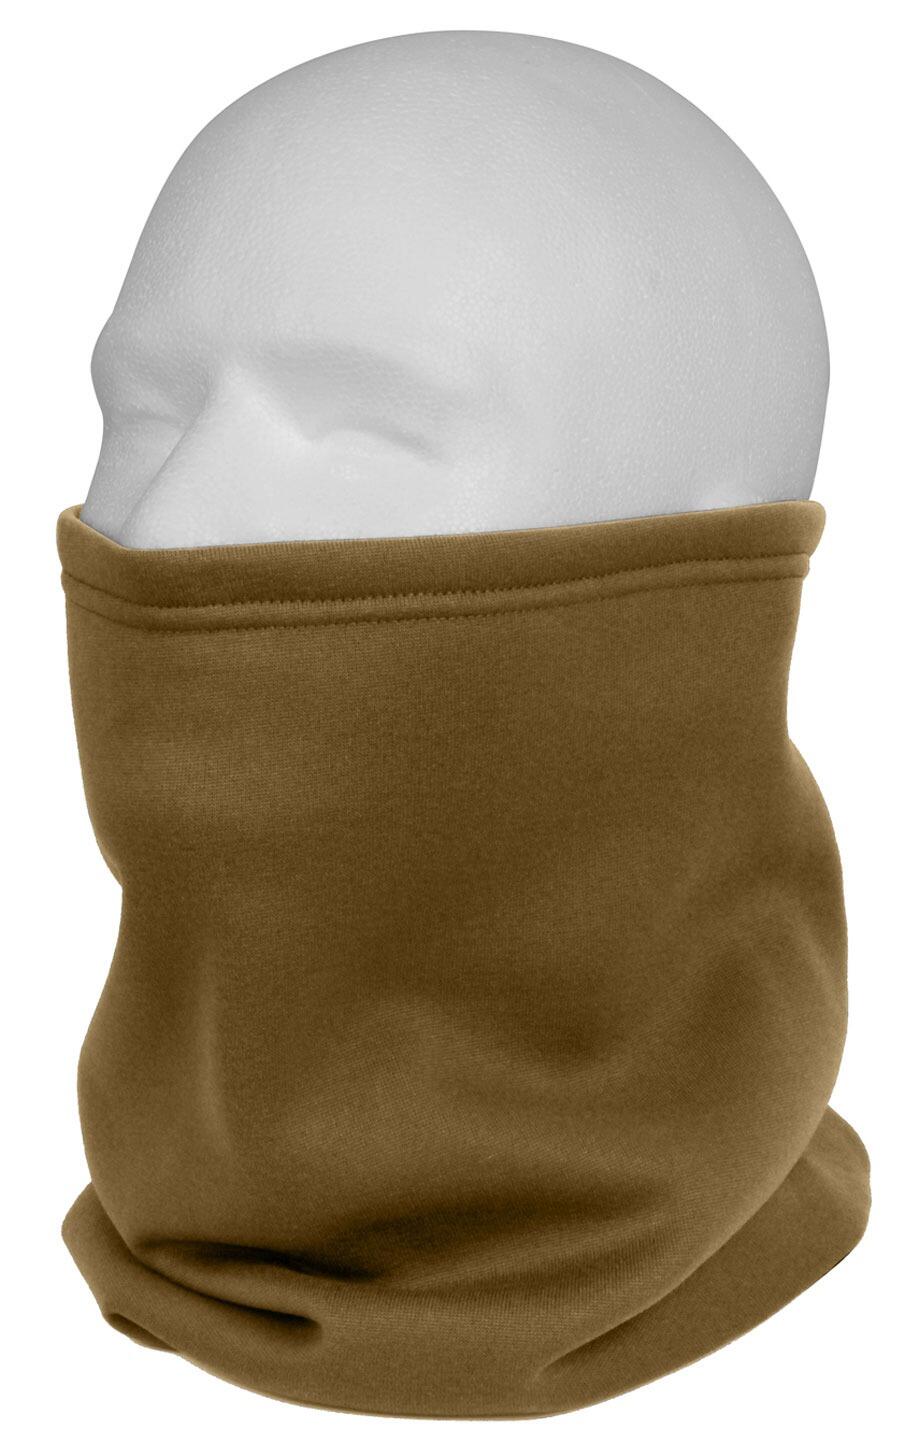 Rothco Extreme Cold Weather (ECWCS) Neck Gaiter - Coyote Brown - shown on head